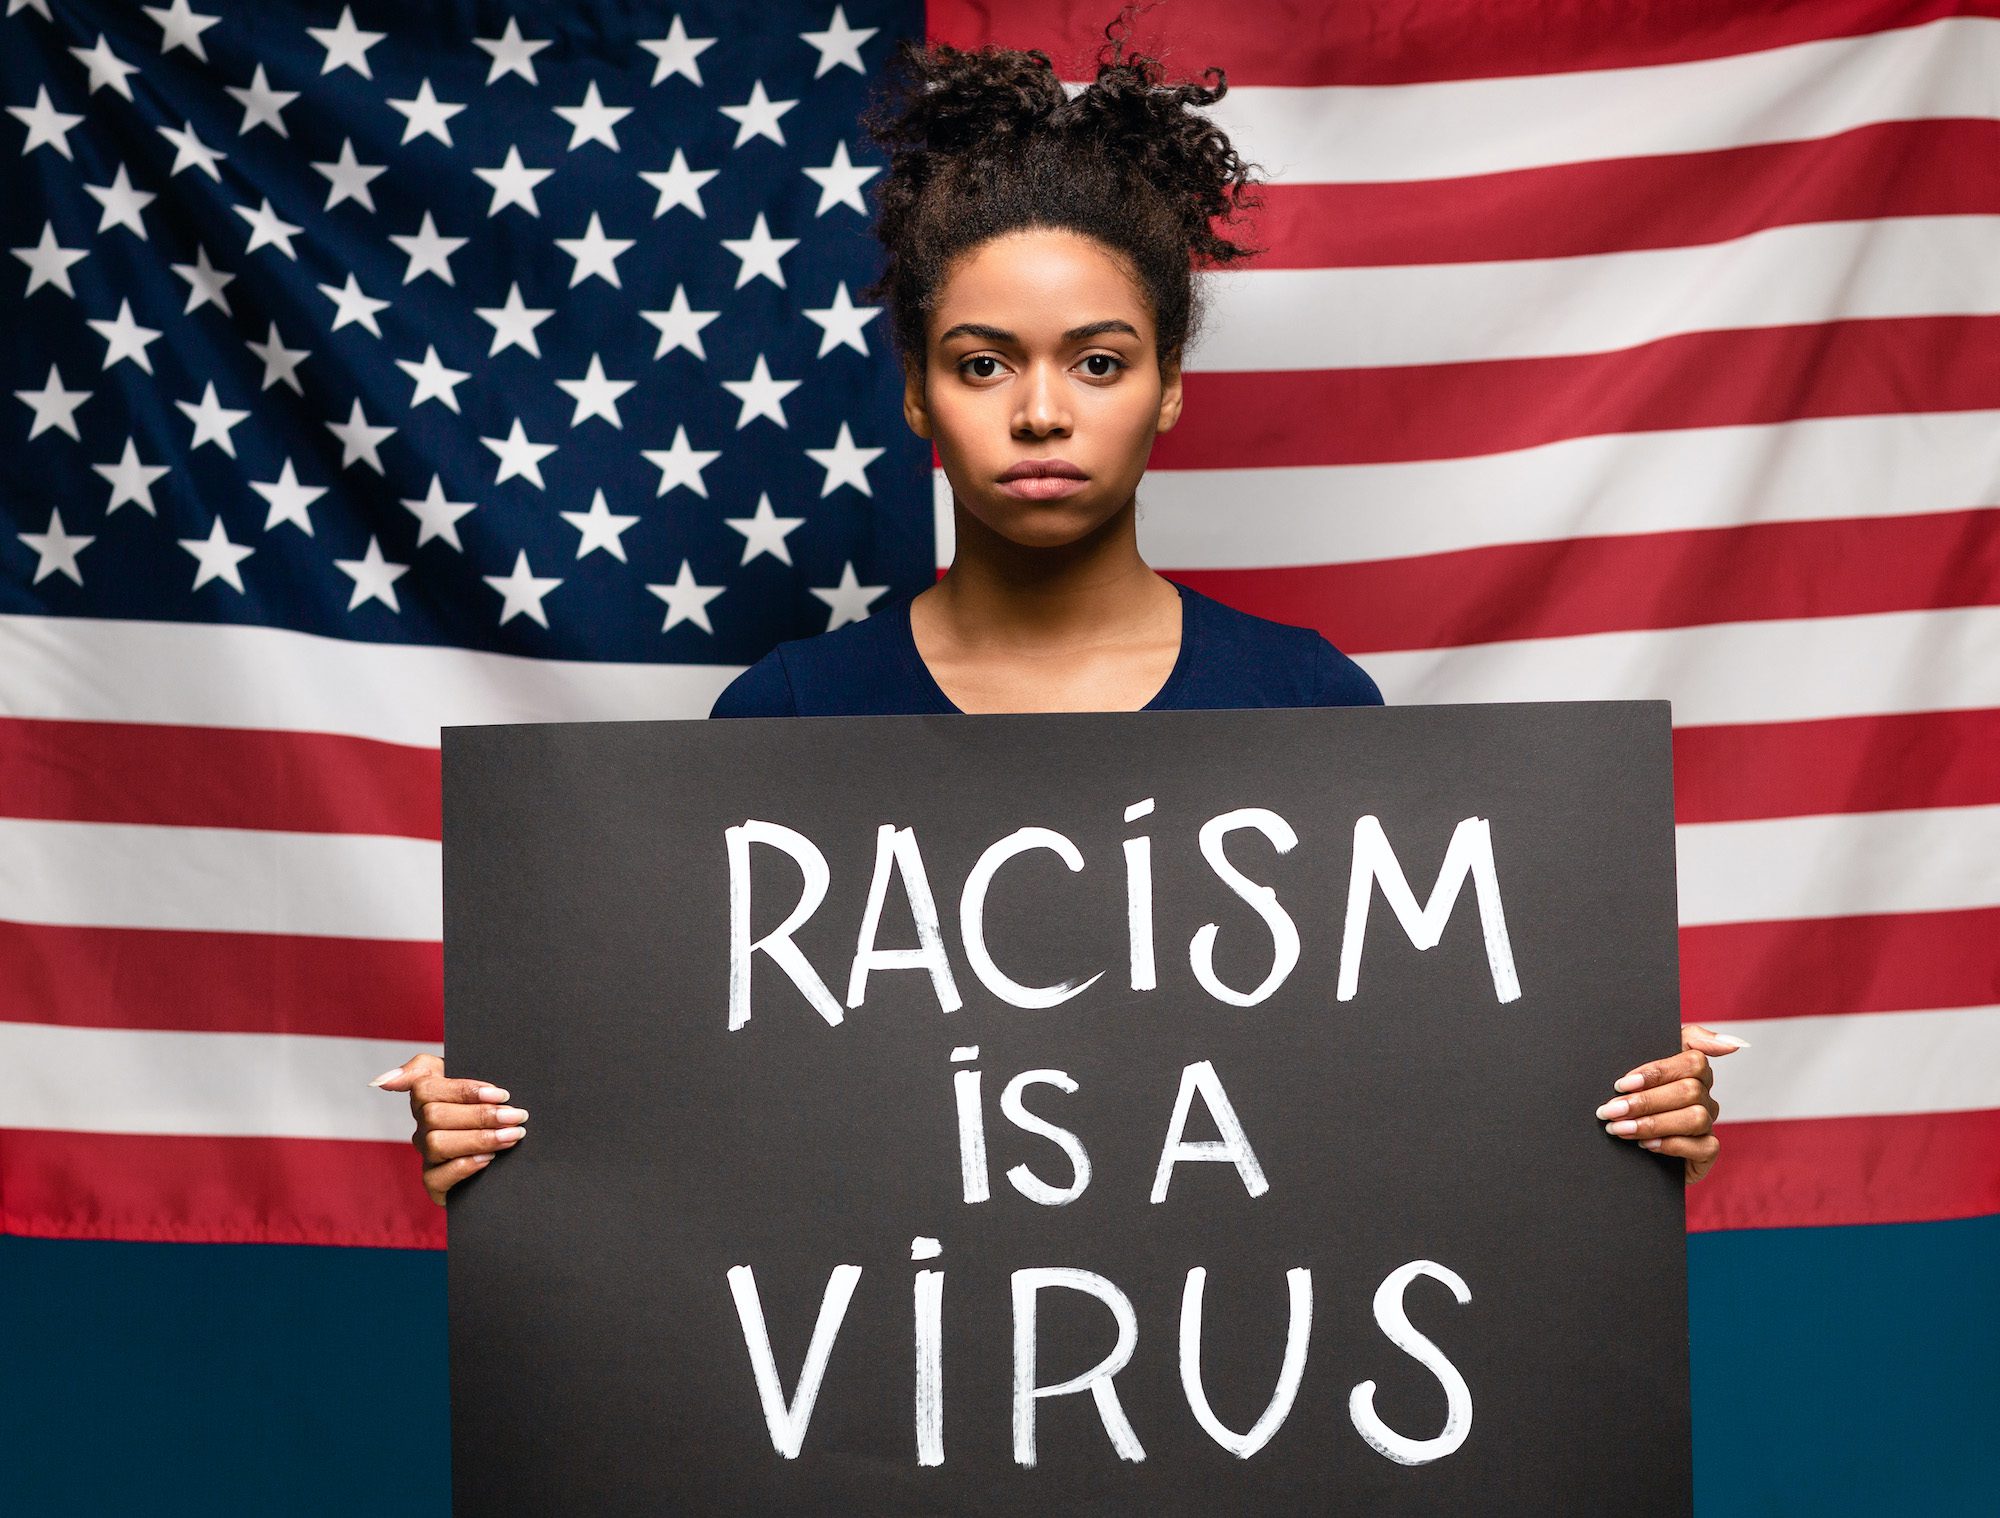 African American teenager standing in front of a flag and holding a placard that says "Racism is a virus."